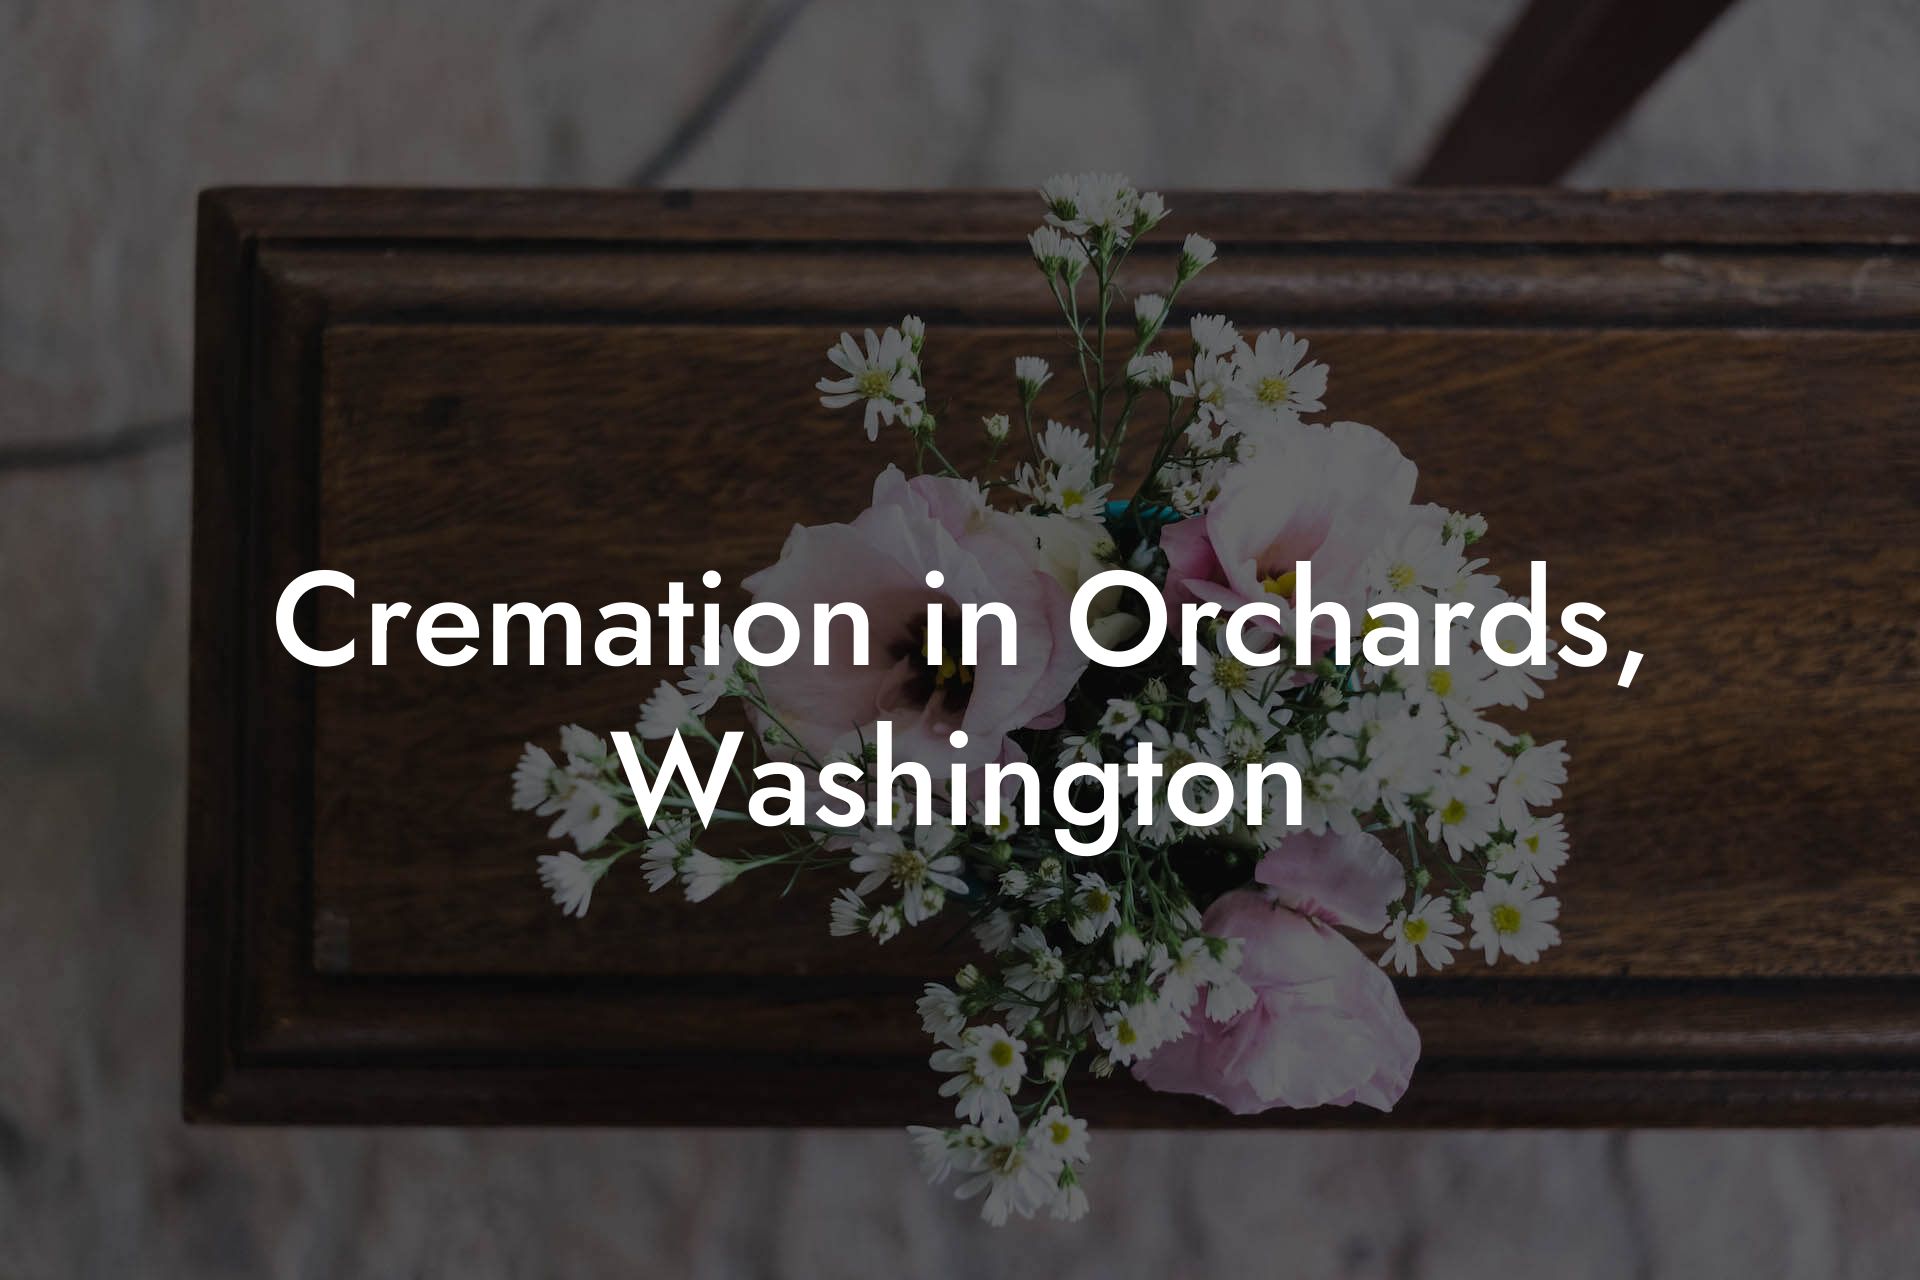 Cremation in Orchards, Washington